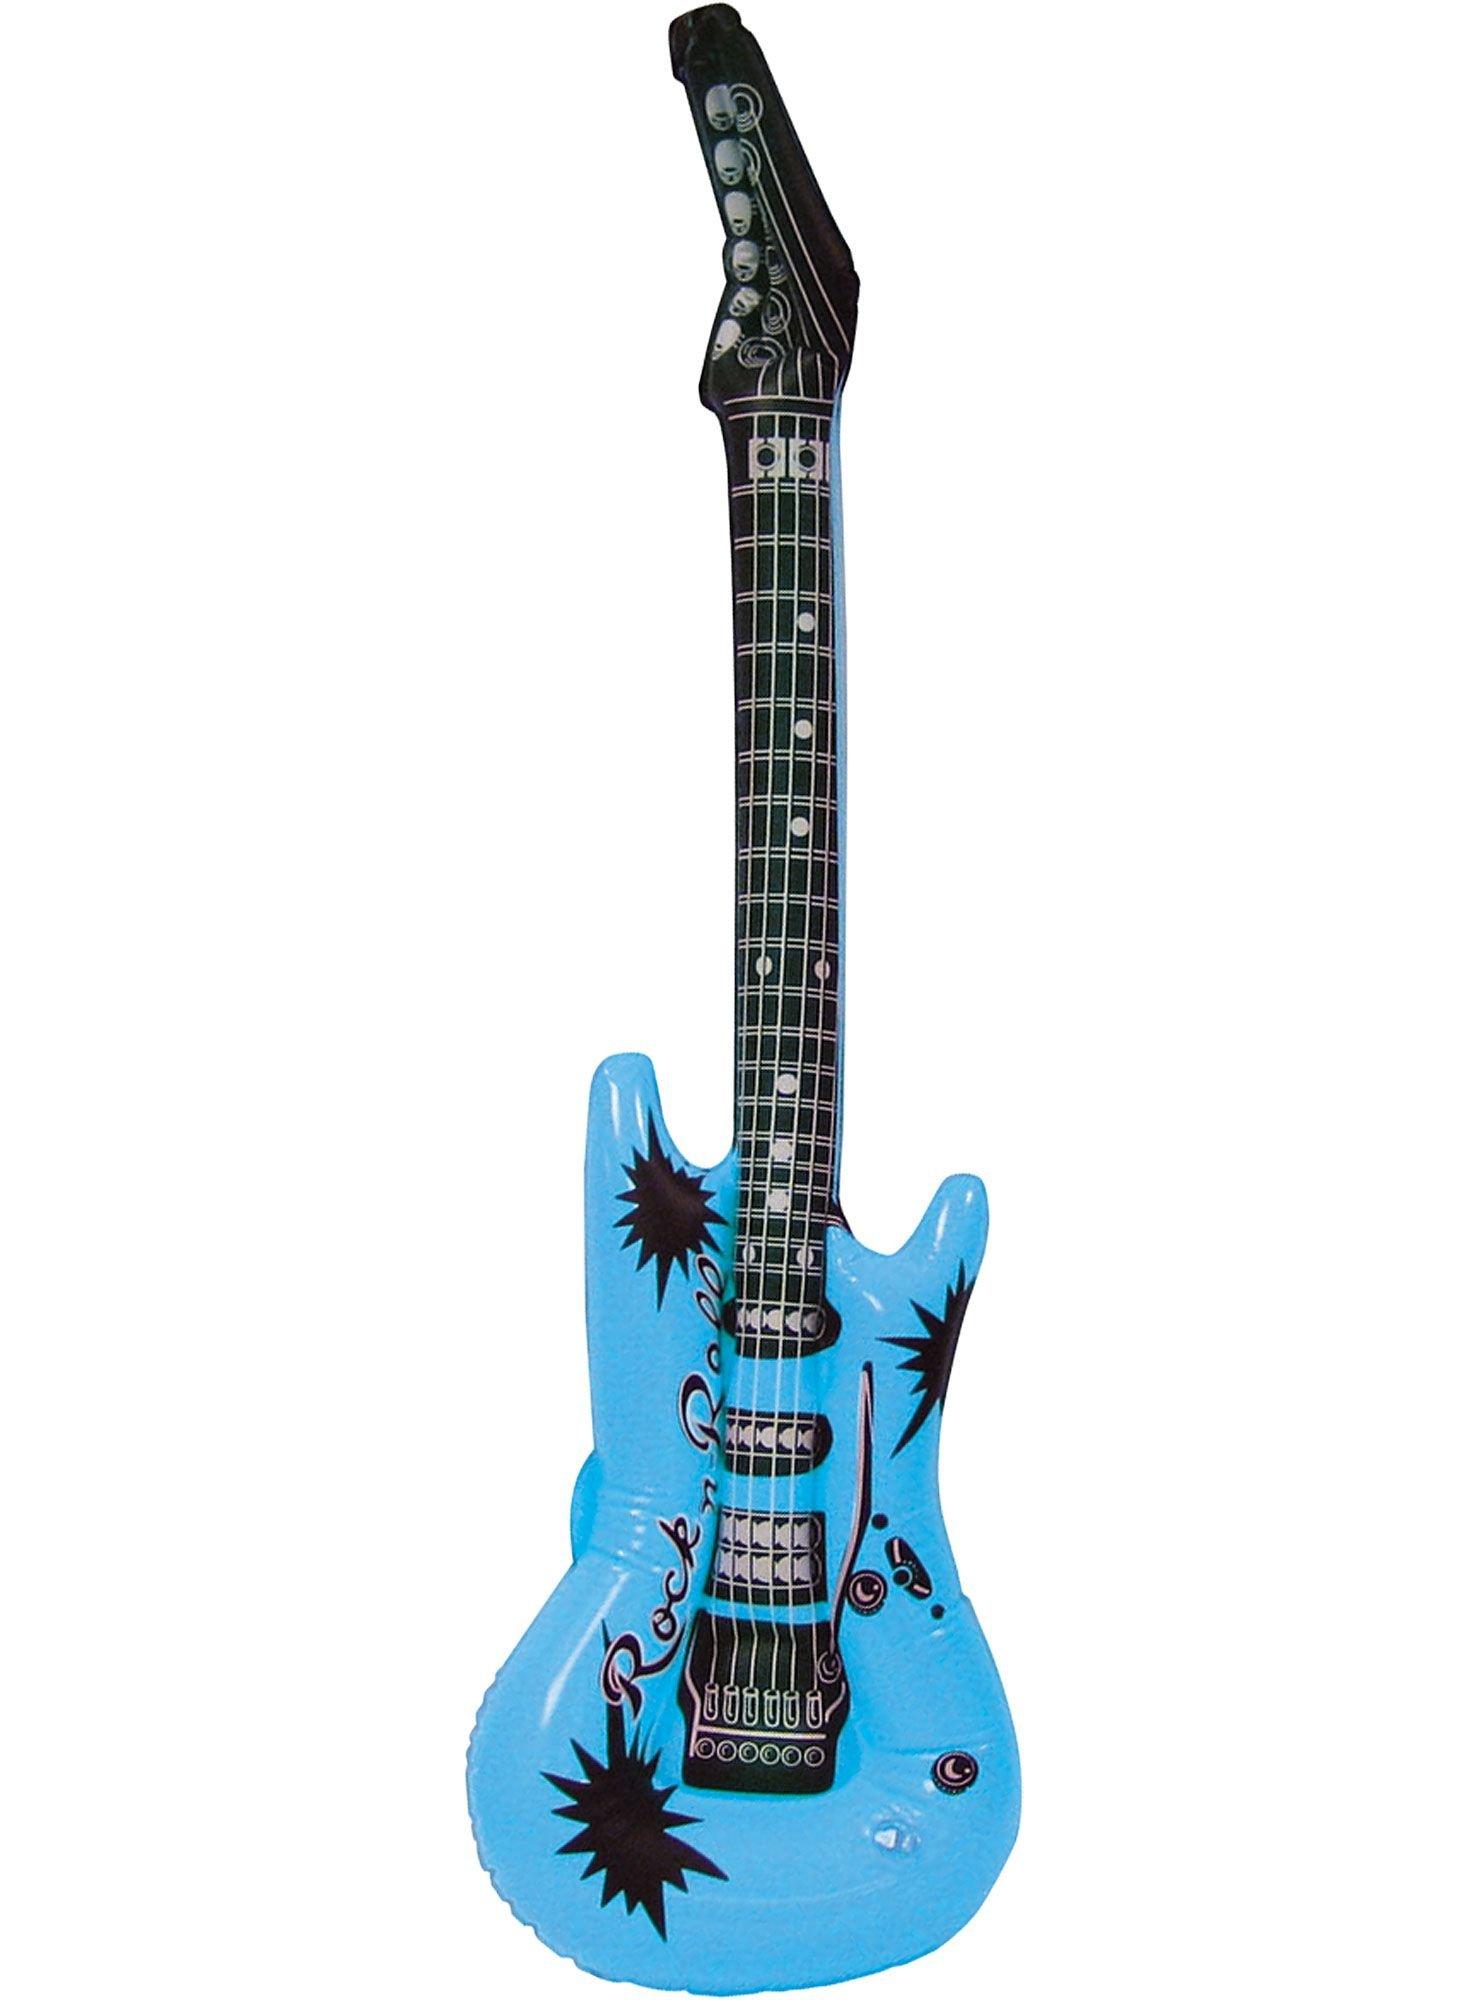 Inflatable Electric Guitar